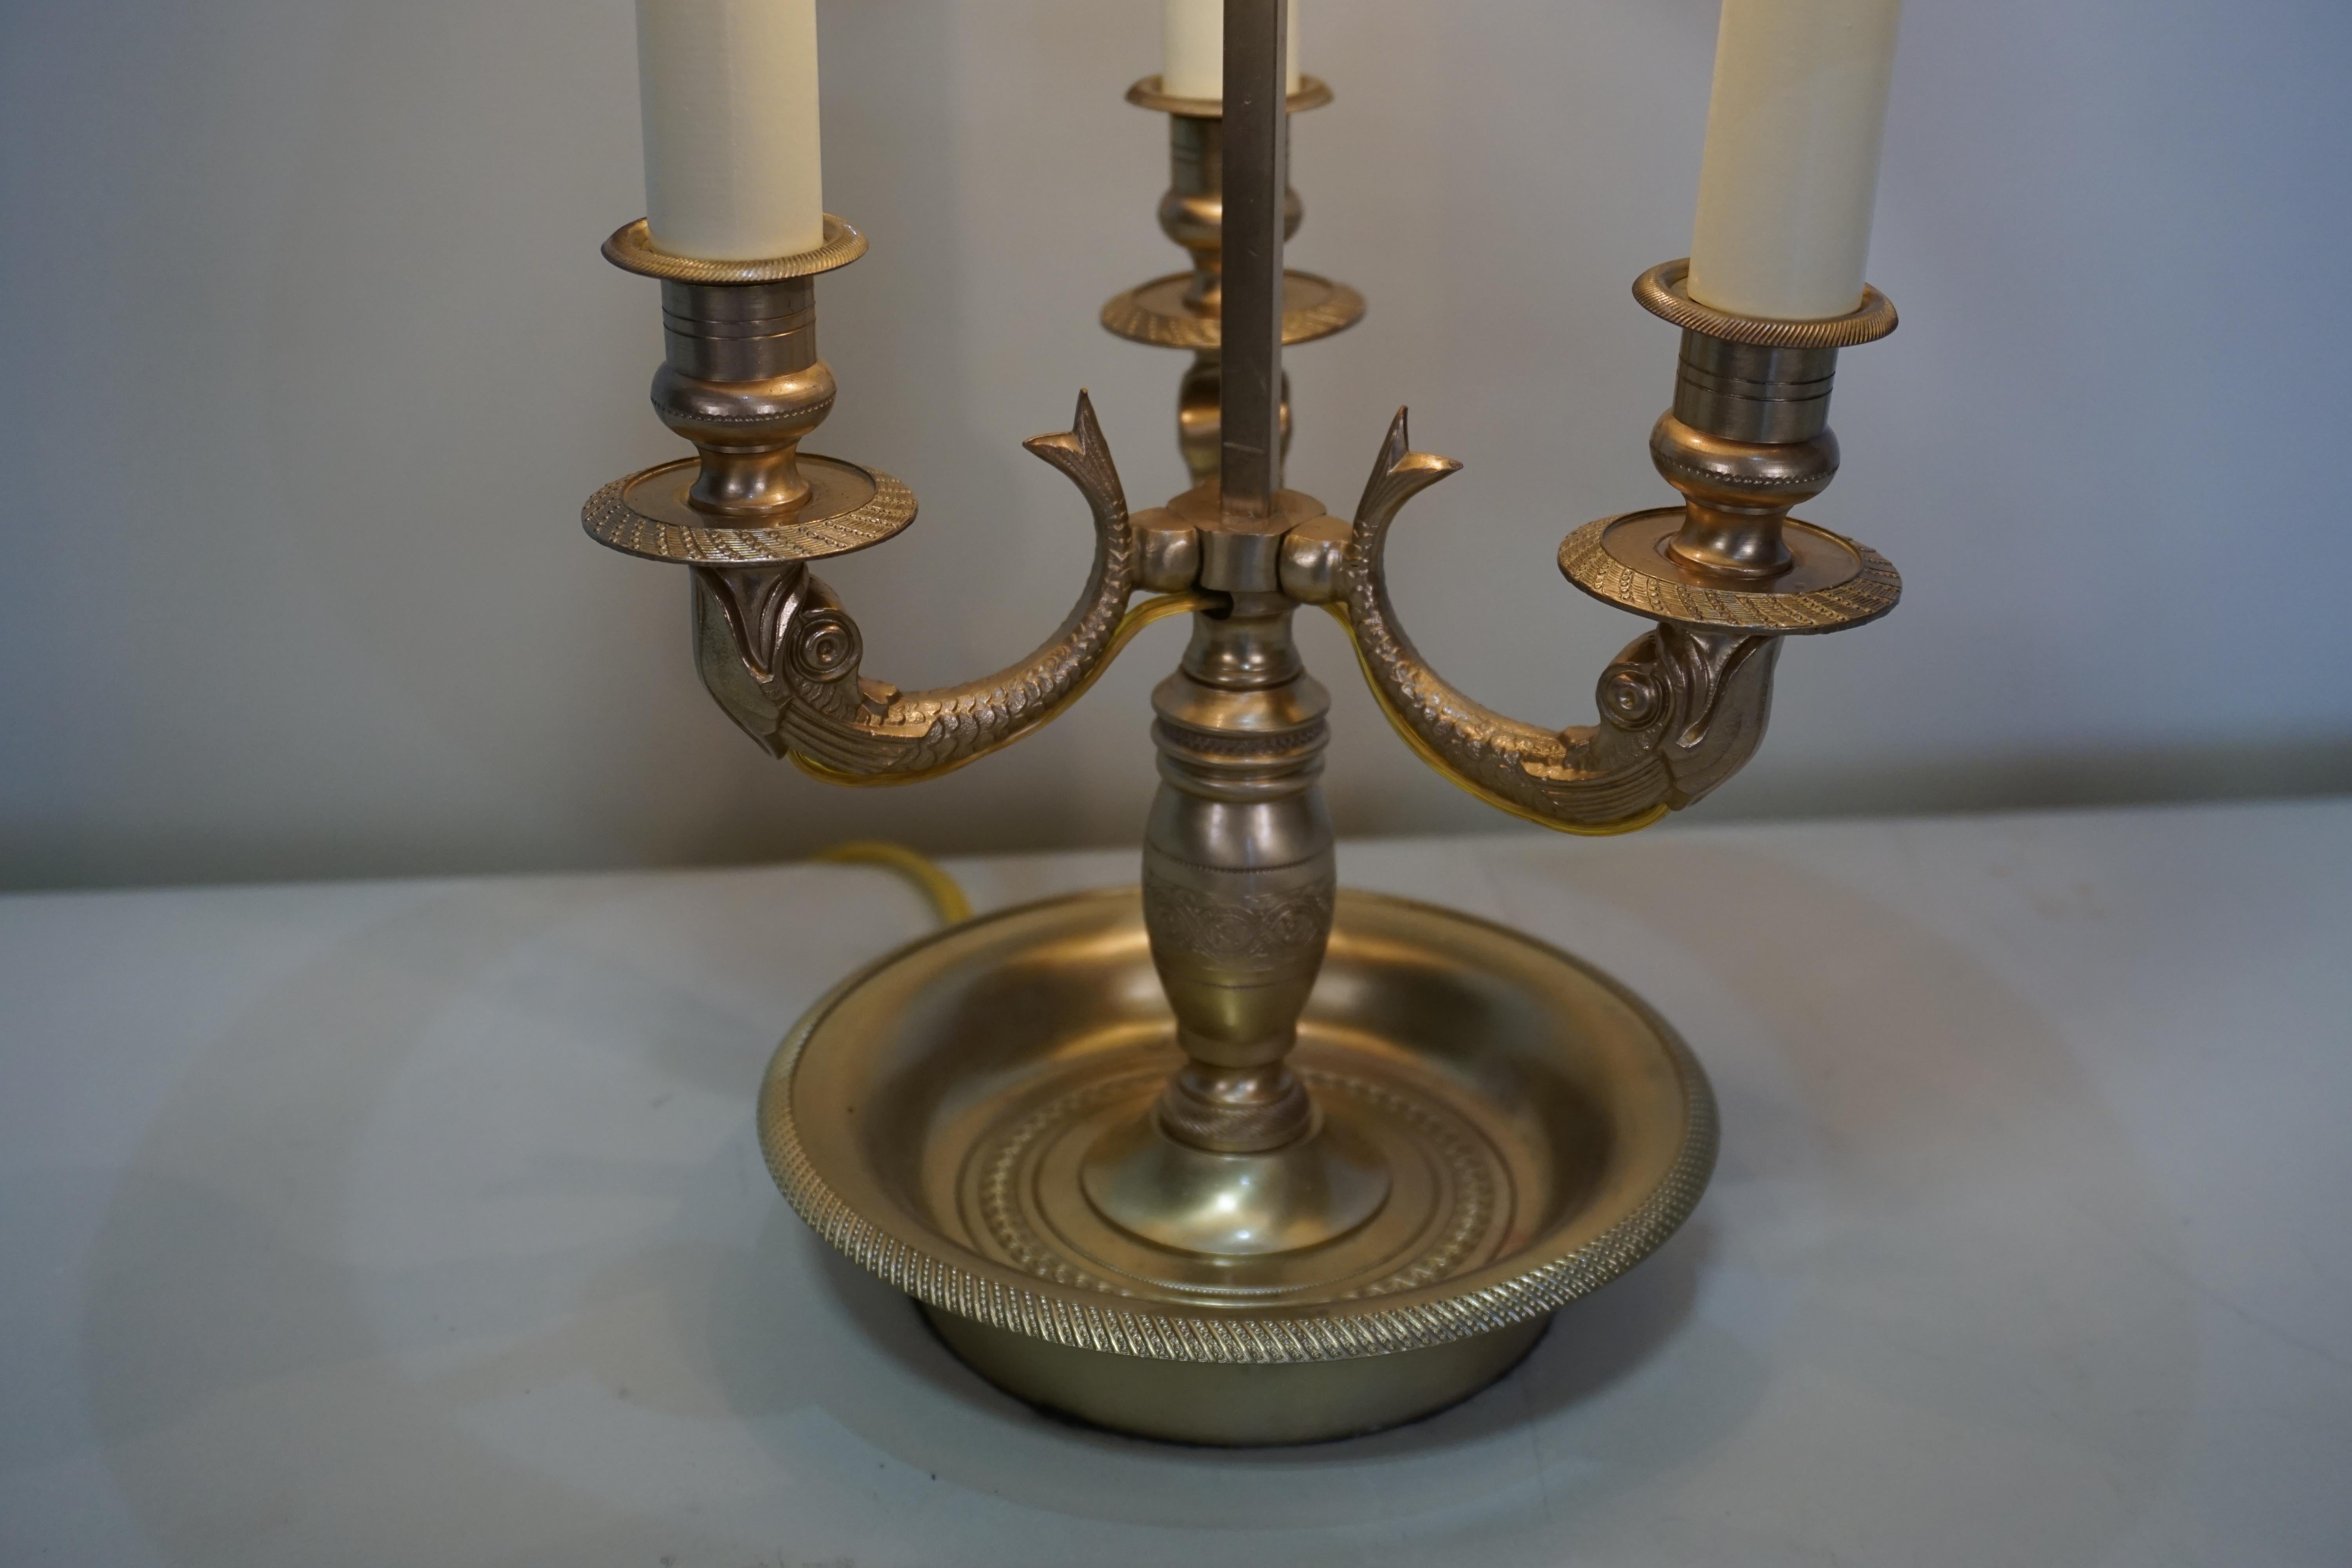 A French Empire style Bouilotte table lamp with metal green lacquered lampshade
Three lights 60watt each.